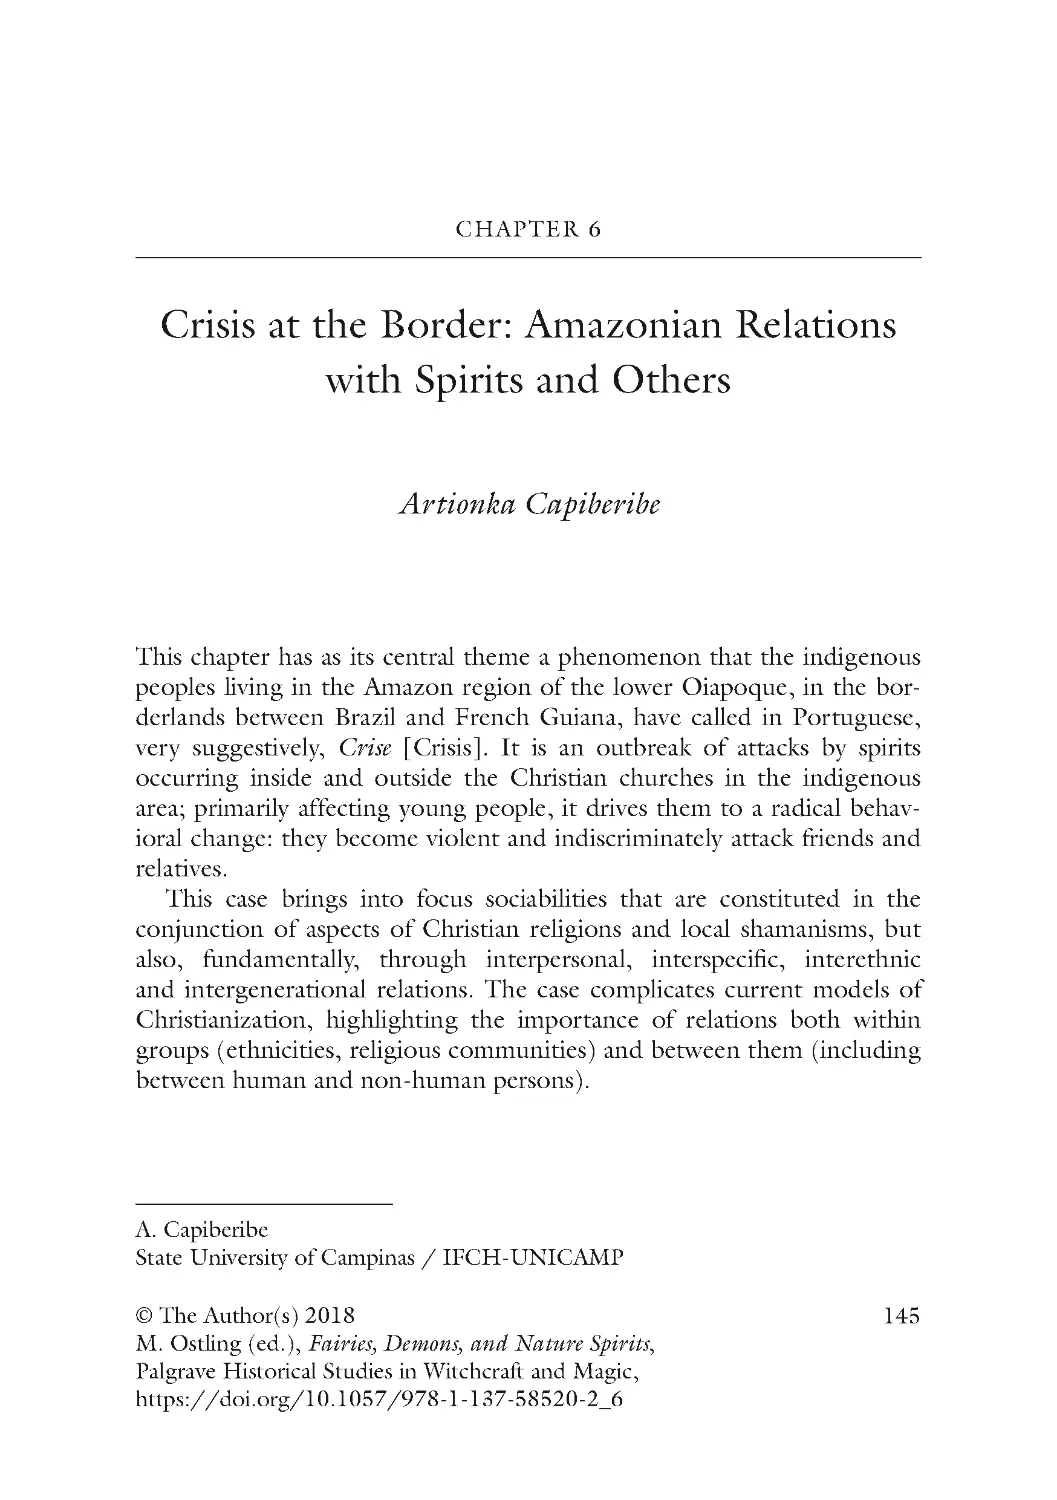 Chapter 6 Crisis at the Border: Amazonian Relations with Spirits and Others